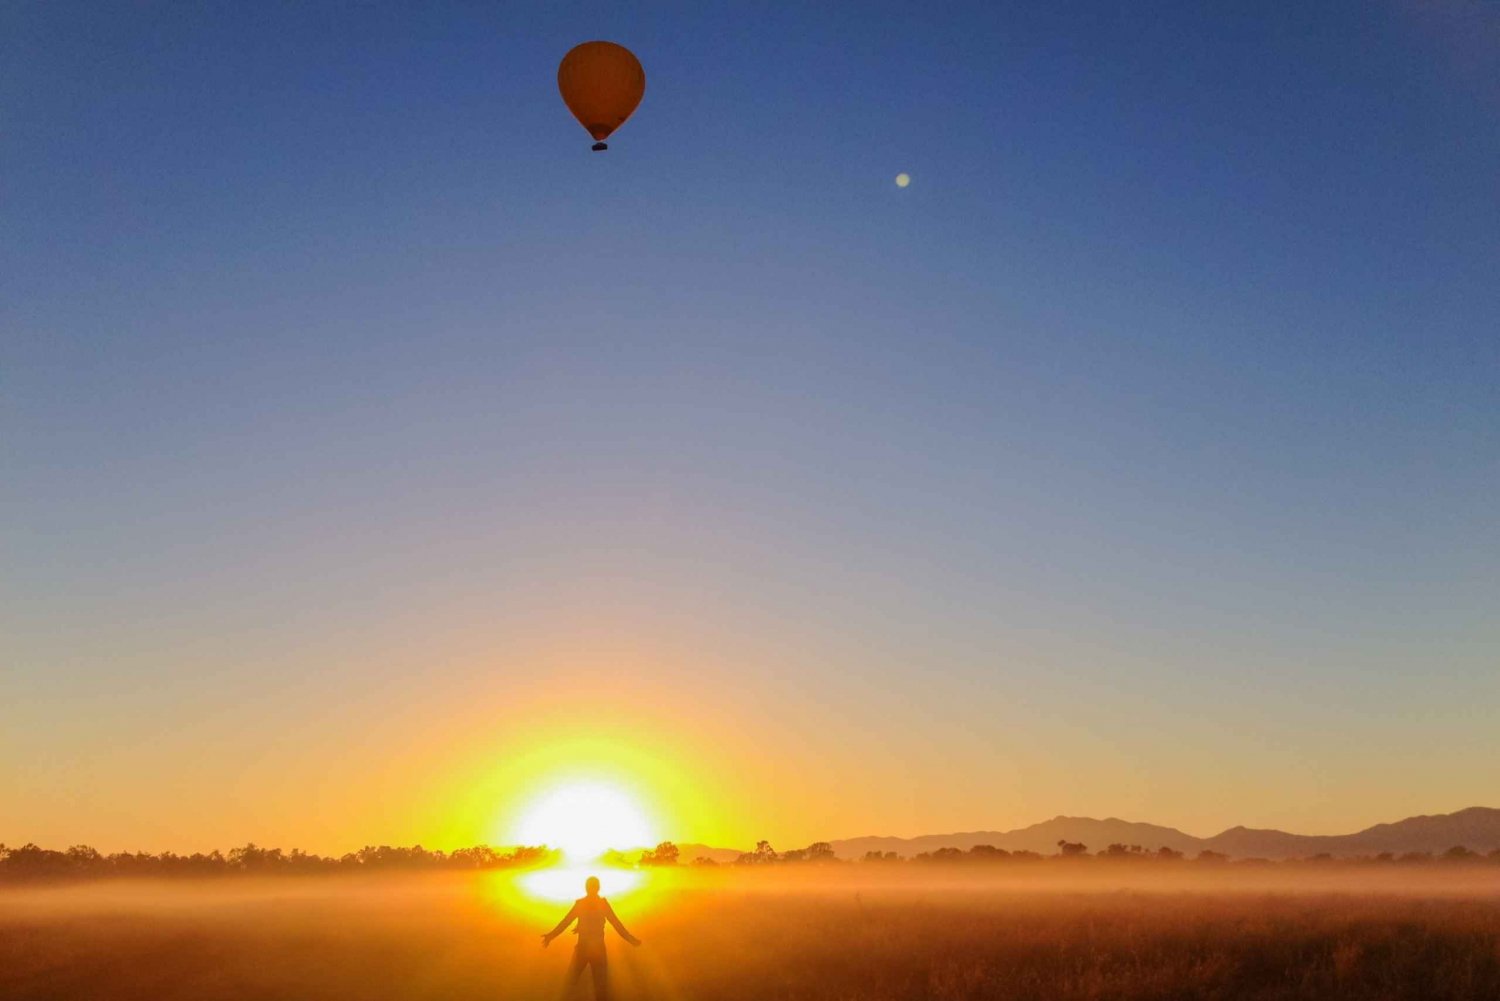 Cairns: Hot Air Balloon Flight with Transfers